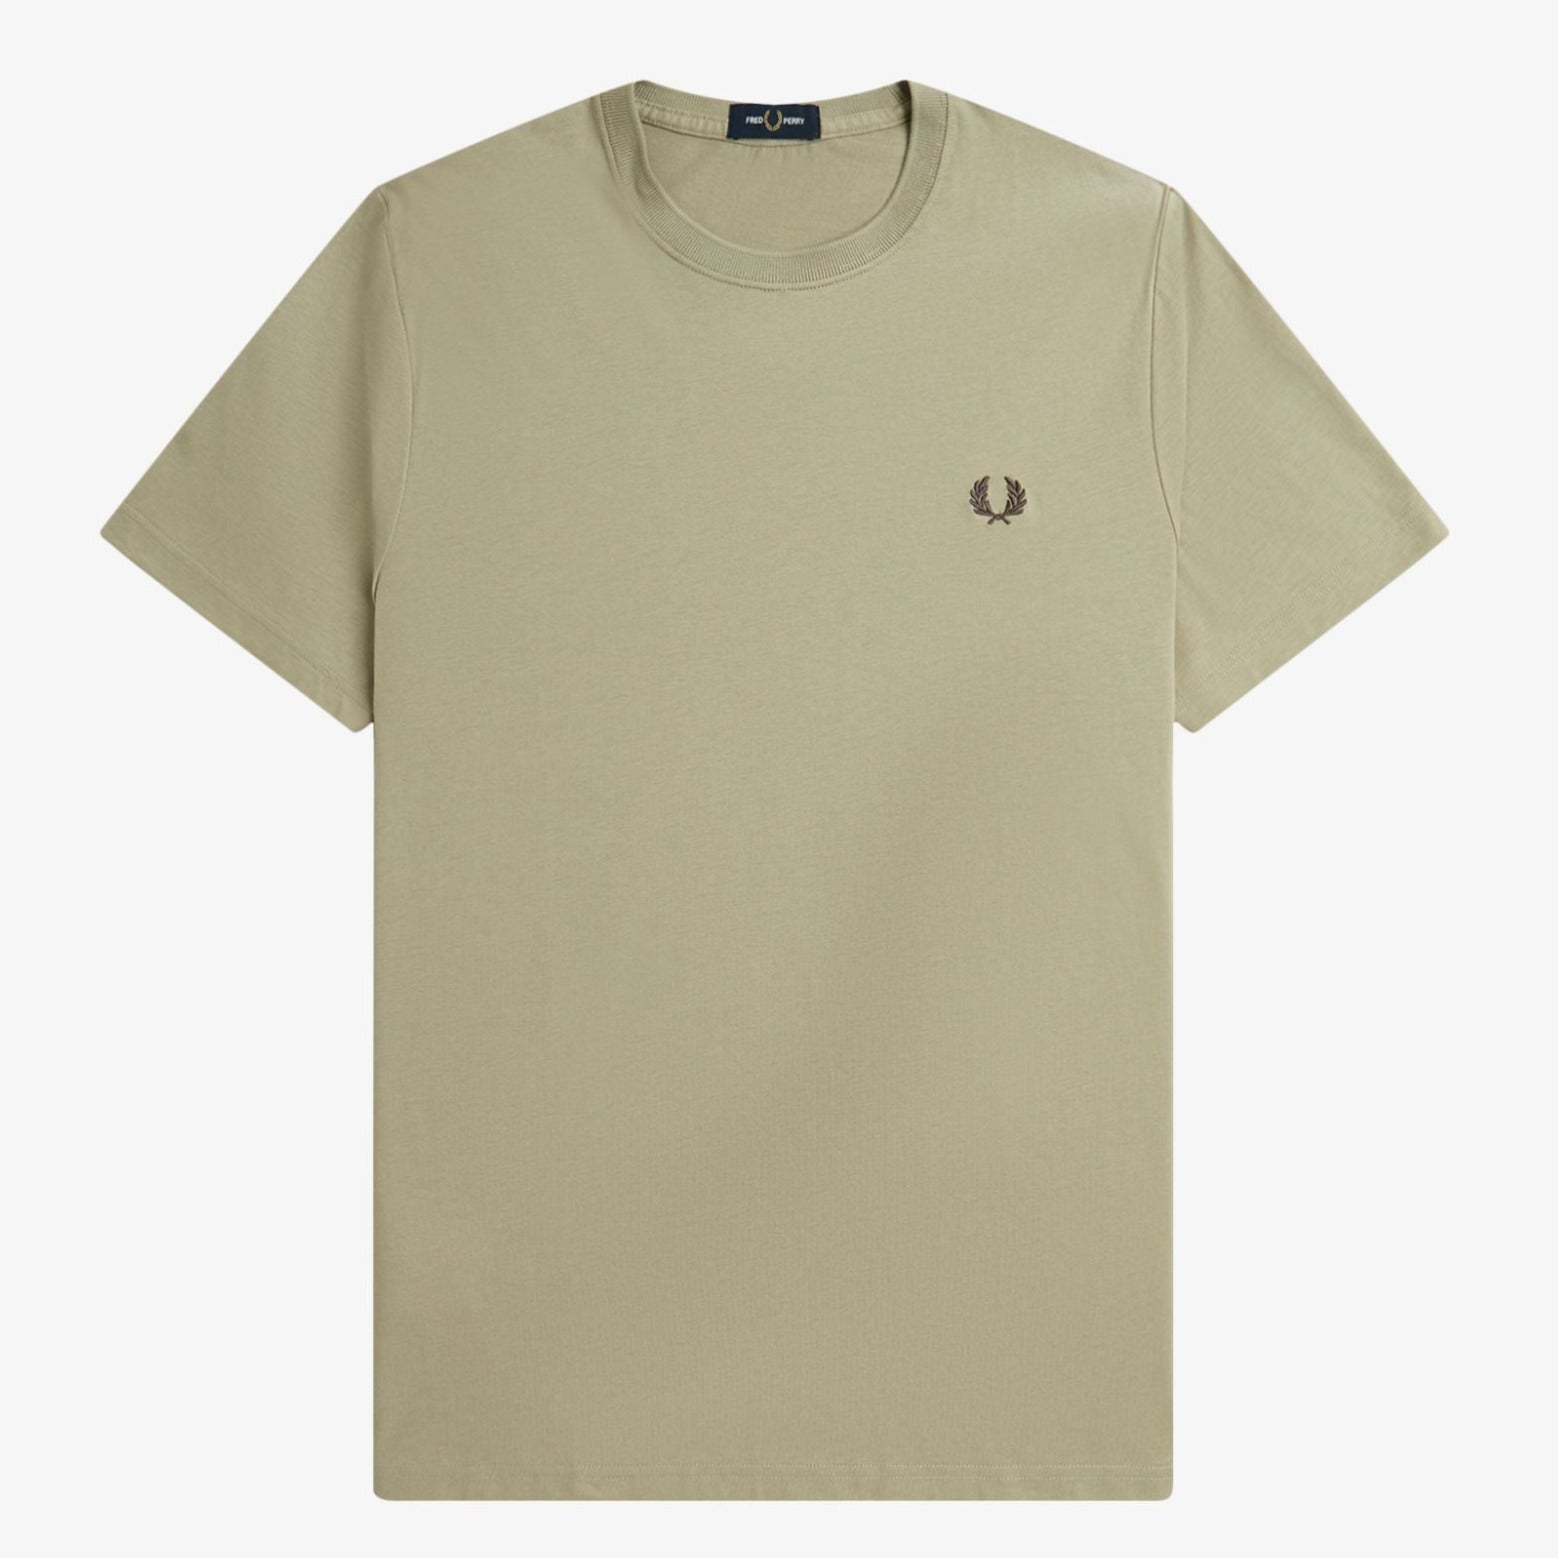 Fred Perry Ringer T-Shirt - Warm Grey / Brick